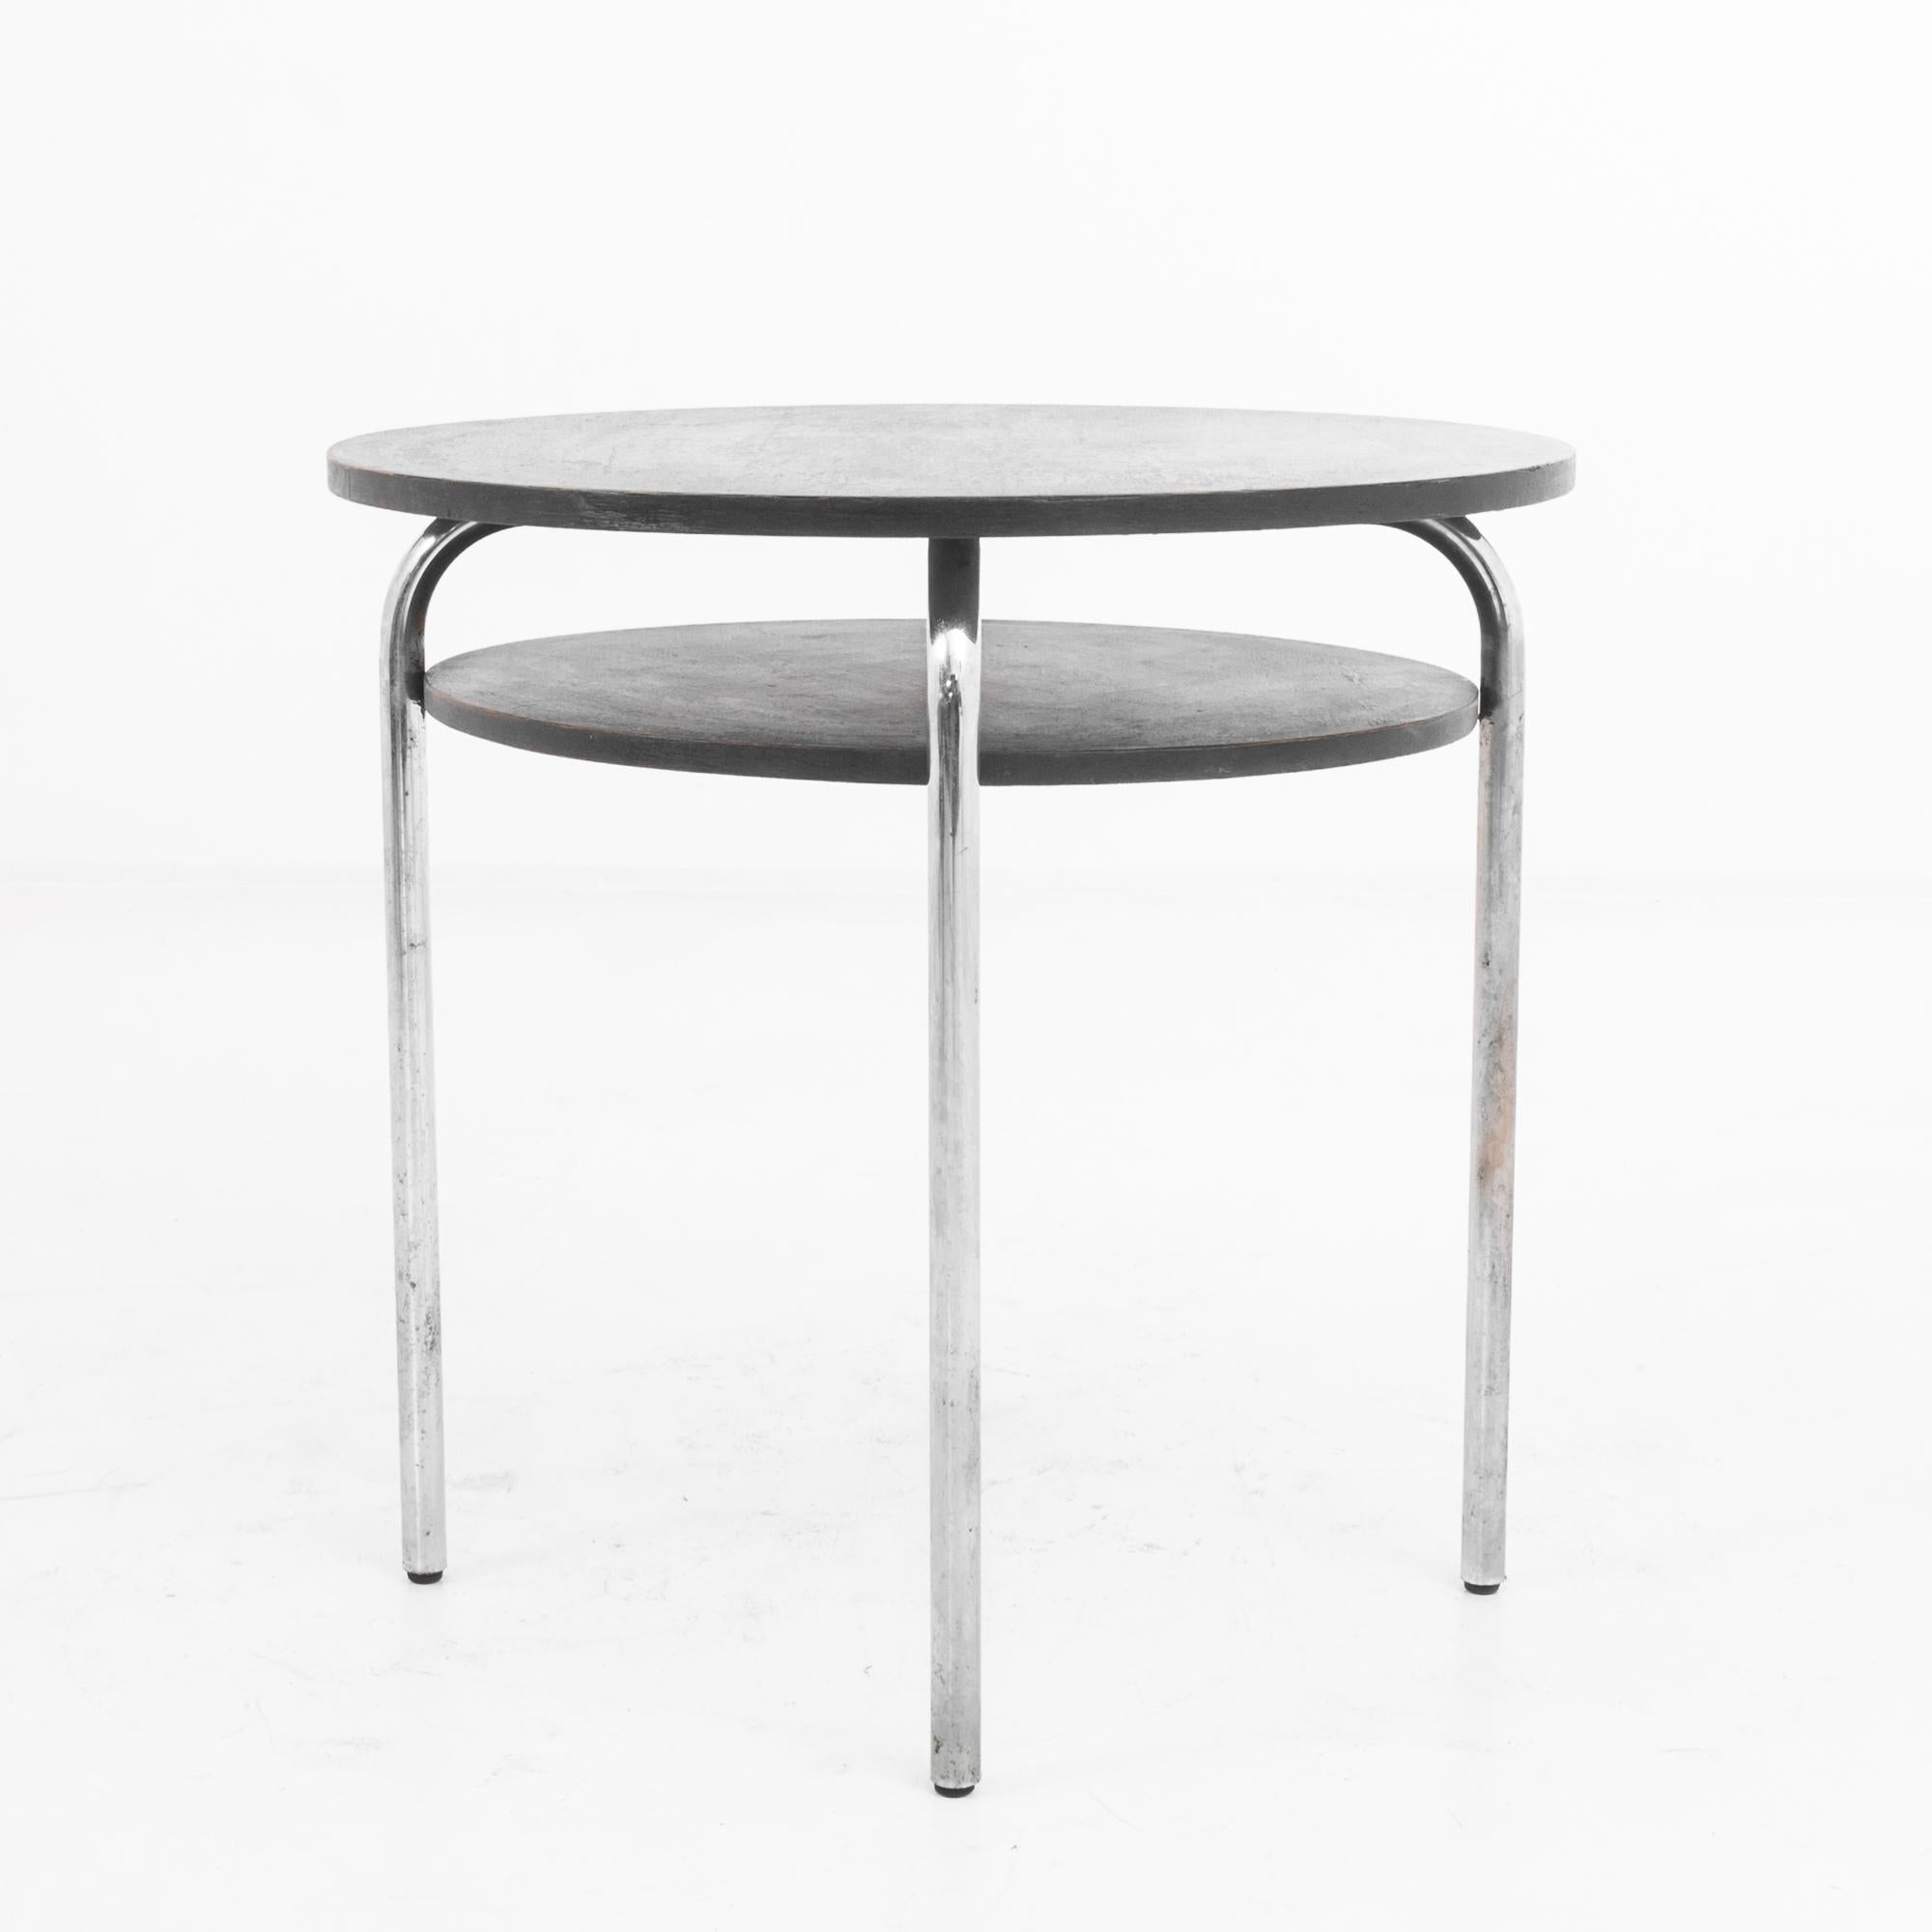 This 1970s German Metal Round Side Table with a Wooden Top is a striking blend of rustic charm and industrial design. The sleek metal legs have a raw, unfinished look that contrasts beautifully with the dark, circular wooden top. The aged patina of